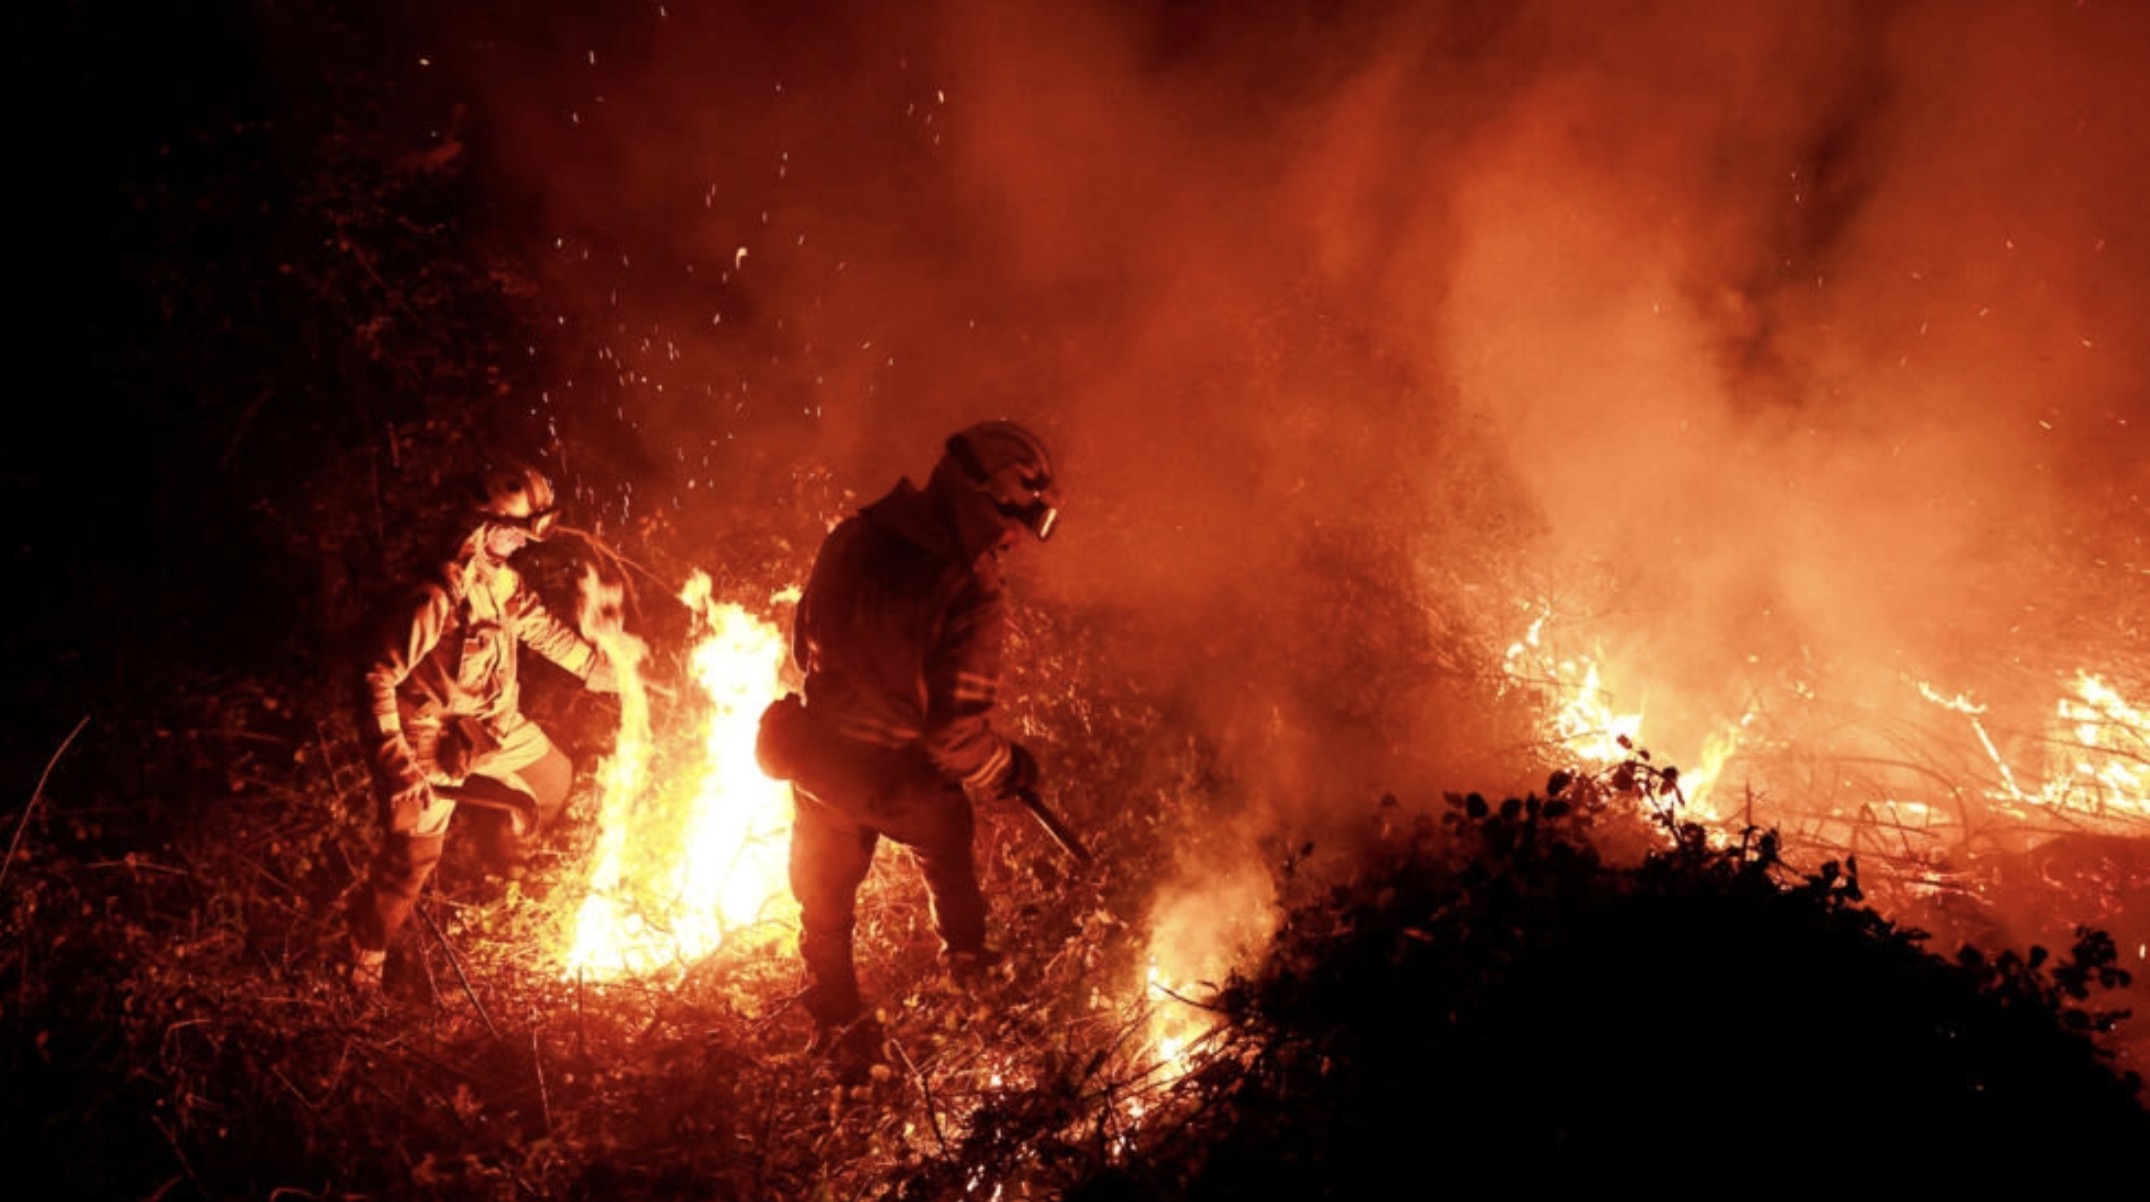 Galician firefighters tackle flames in a forest during an outbreak of wildfires following a prolonged period of drought and unusually high temperatures, Piedrafita, Asturias, Spain, March 31, 2023. /Reuters